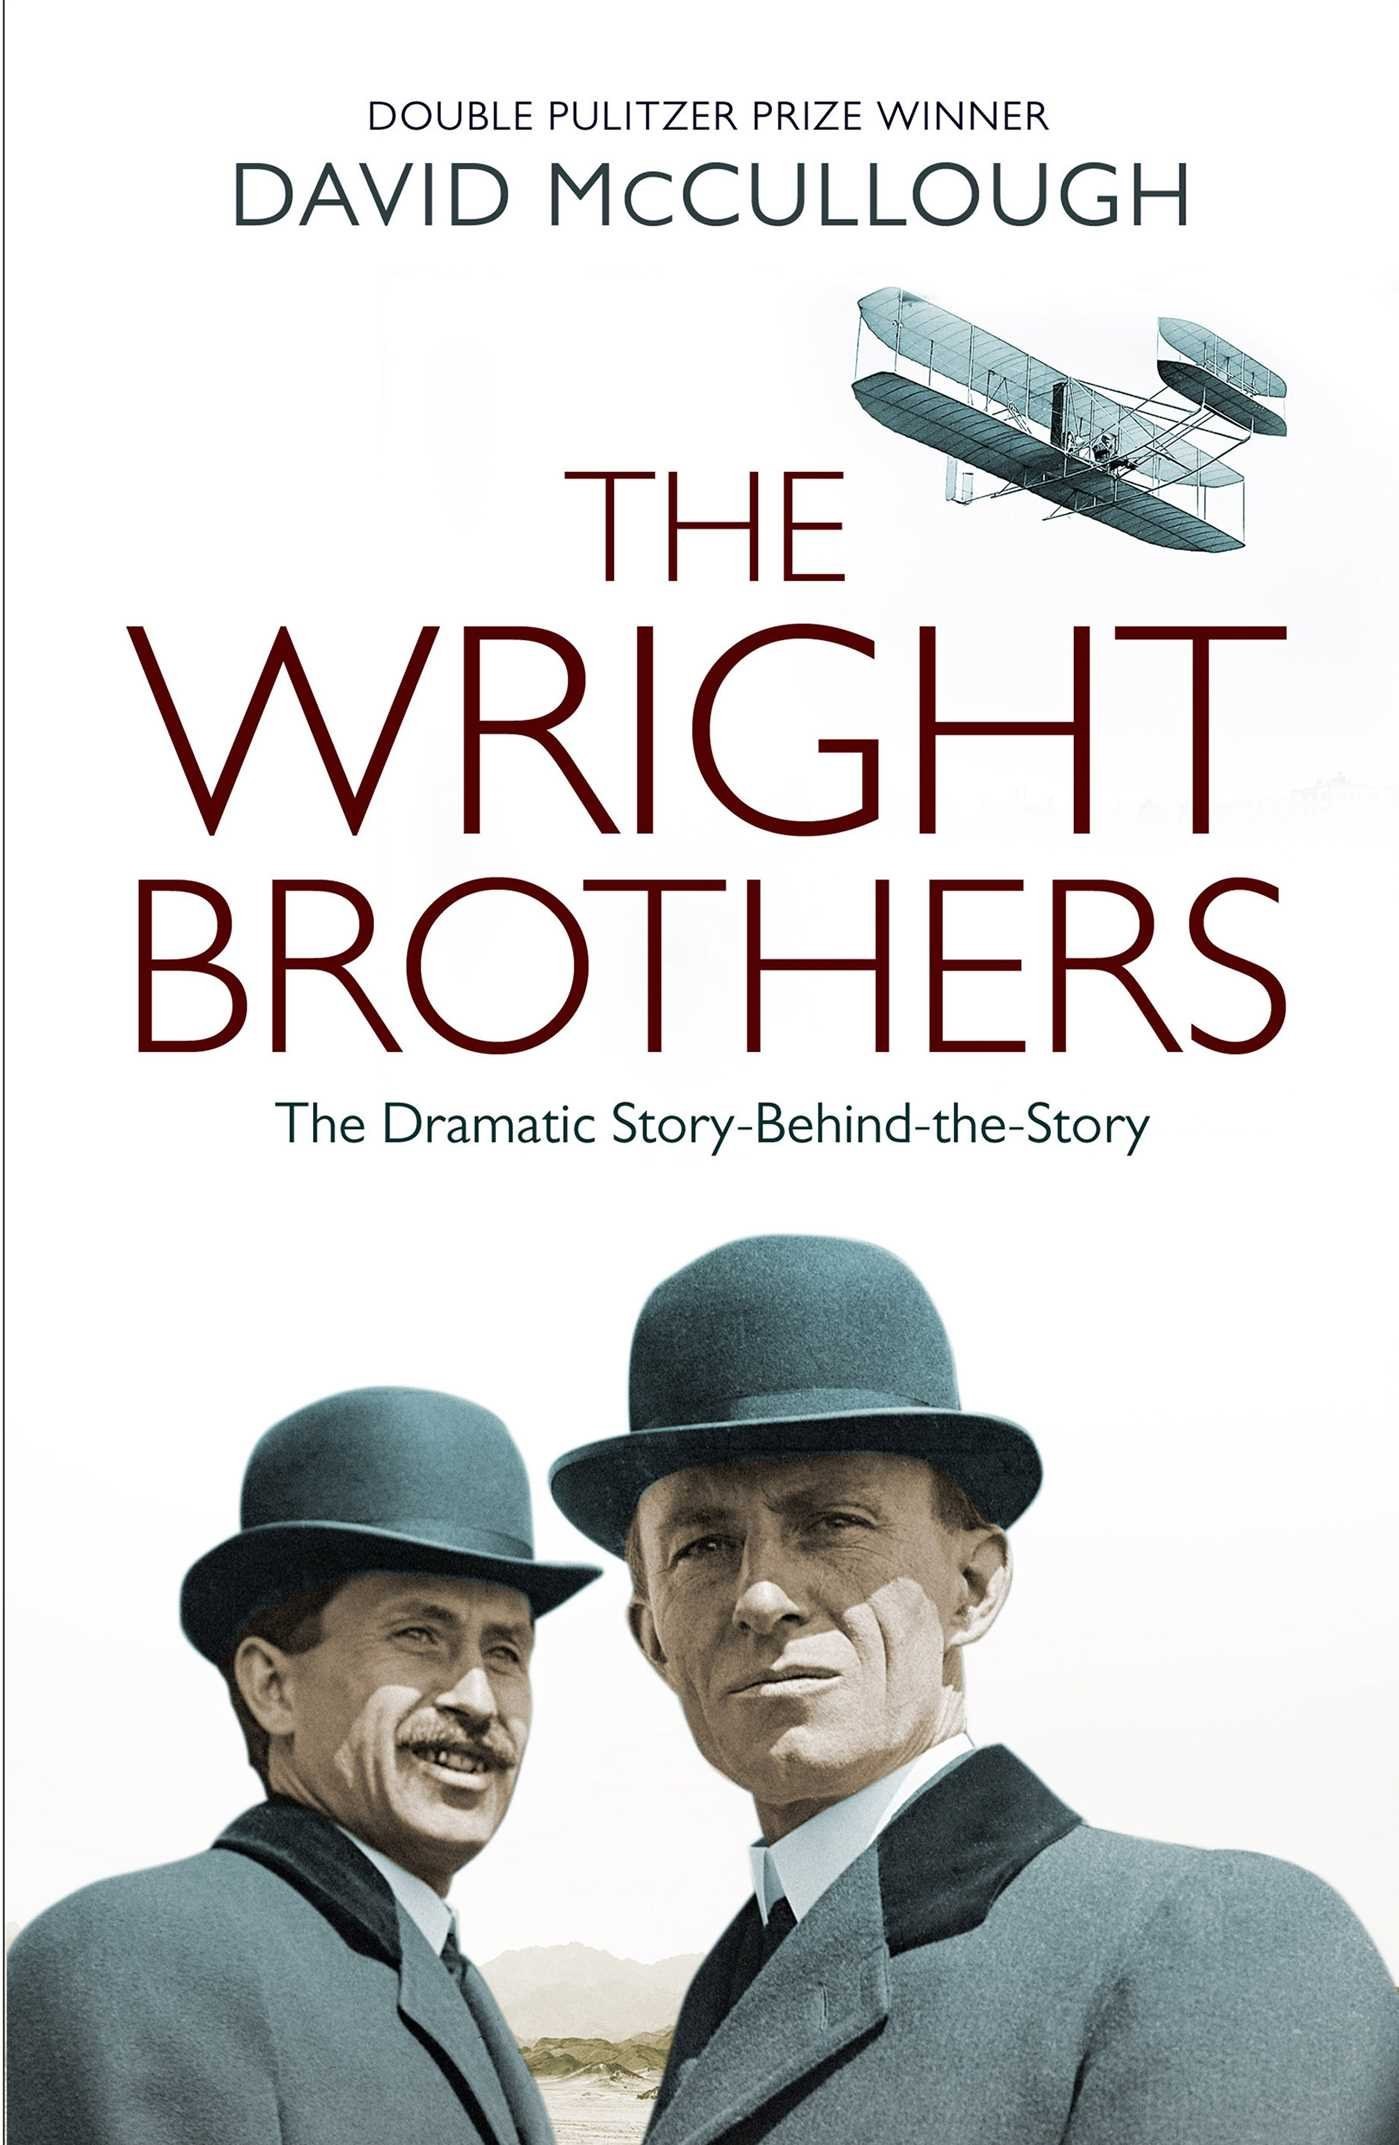 David McCullough – The Wright Brothers